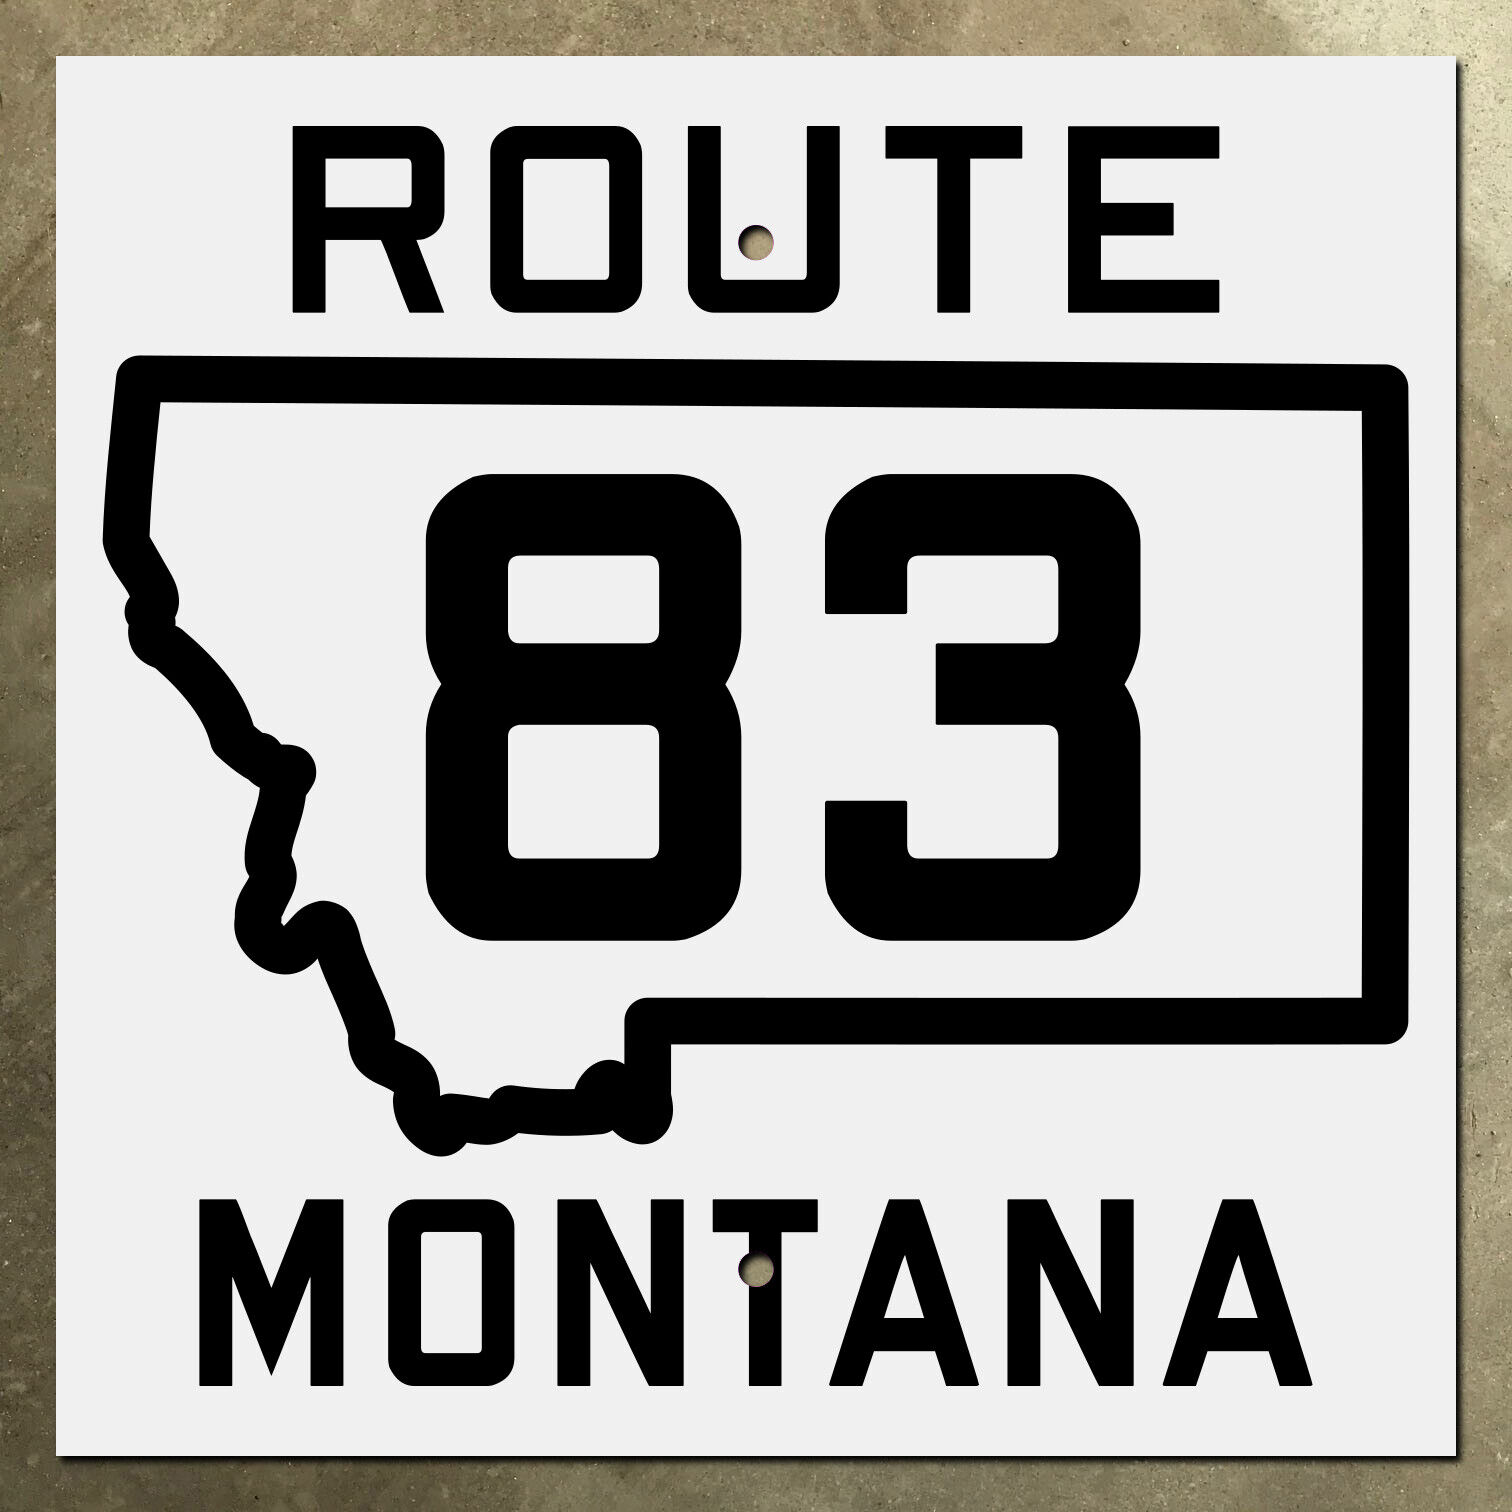 Montana state route 83 highway marker road sign shield map Seeley Lake 1934 12\